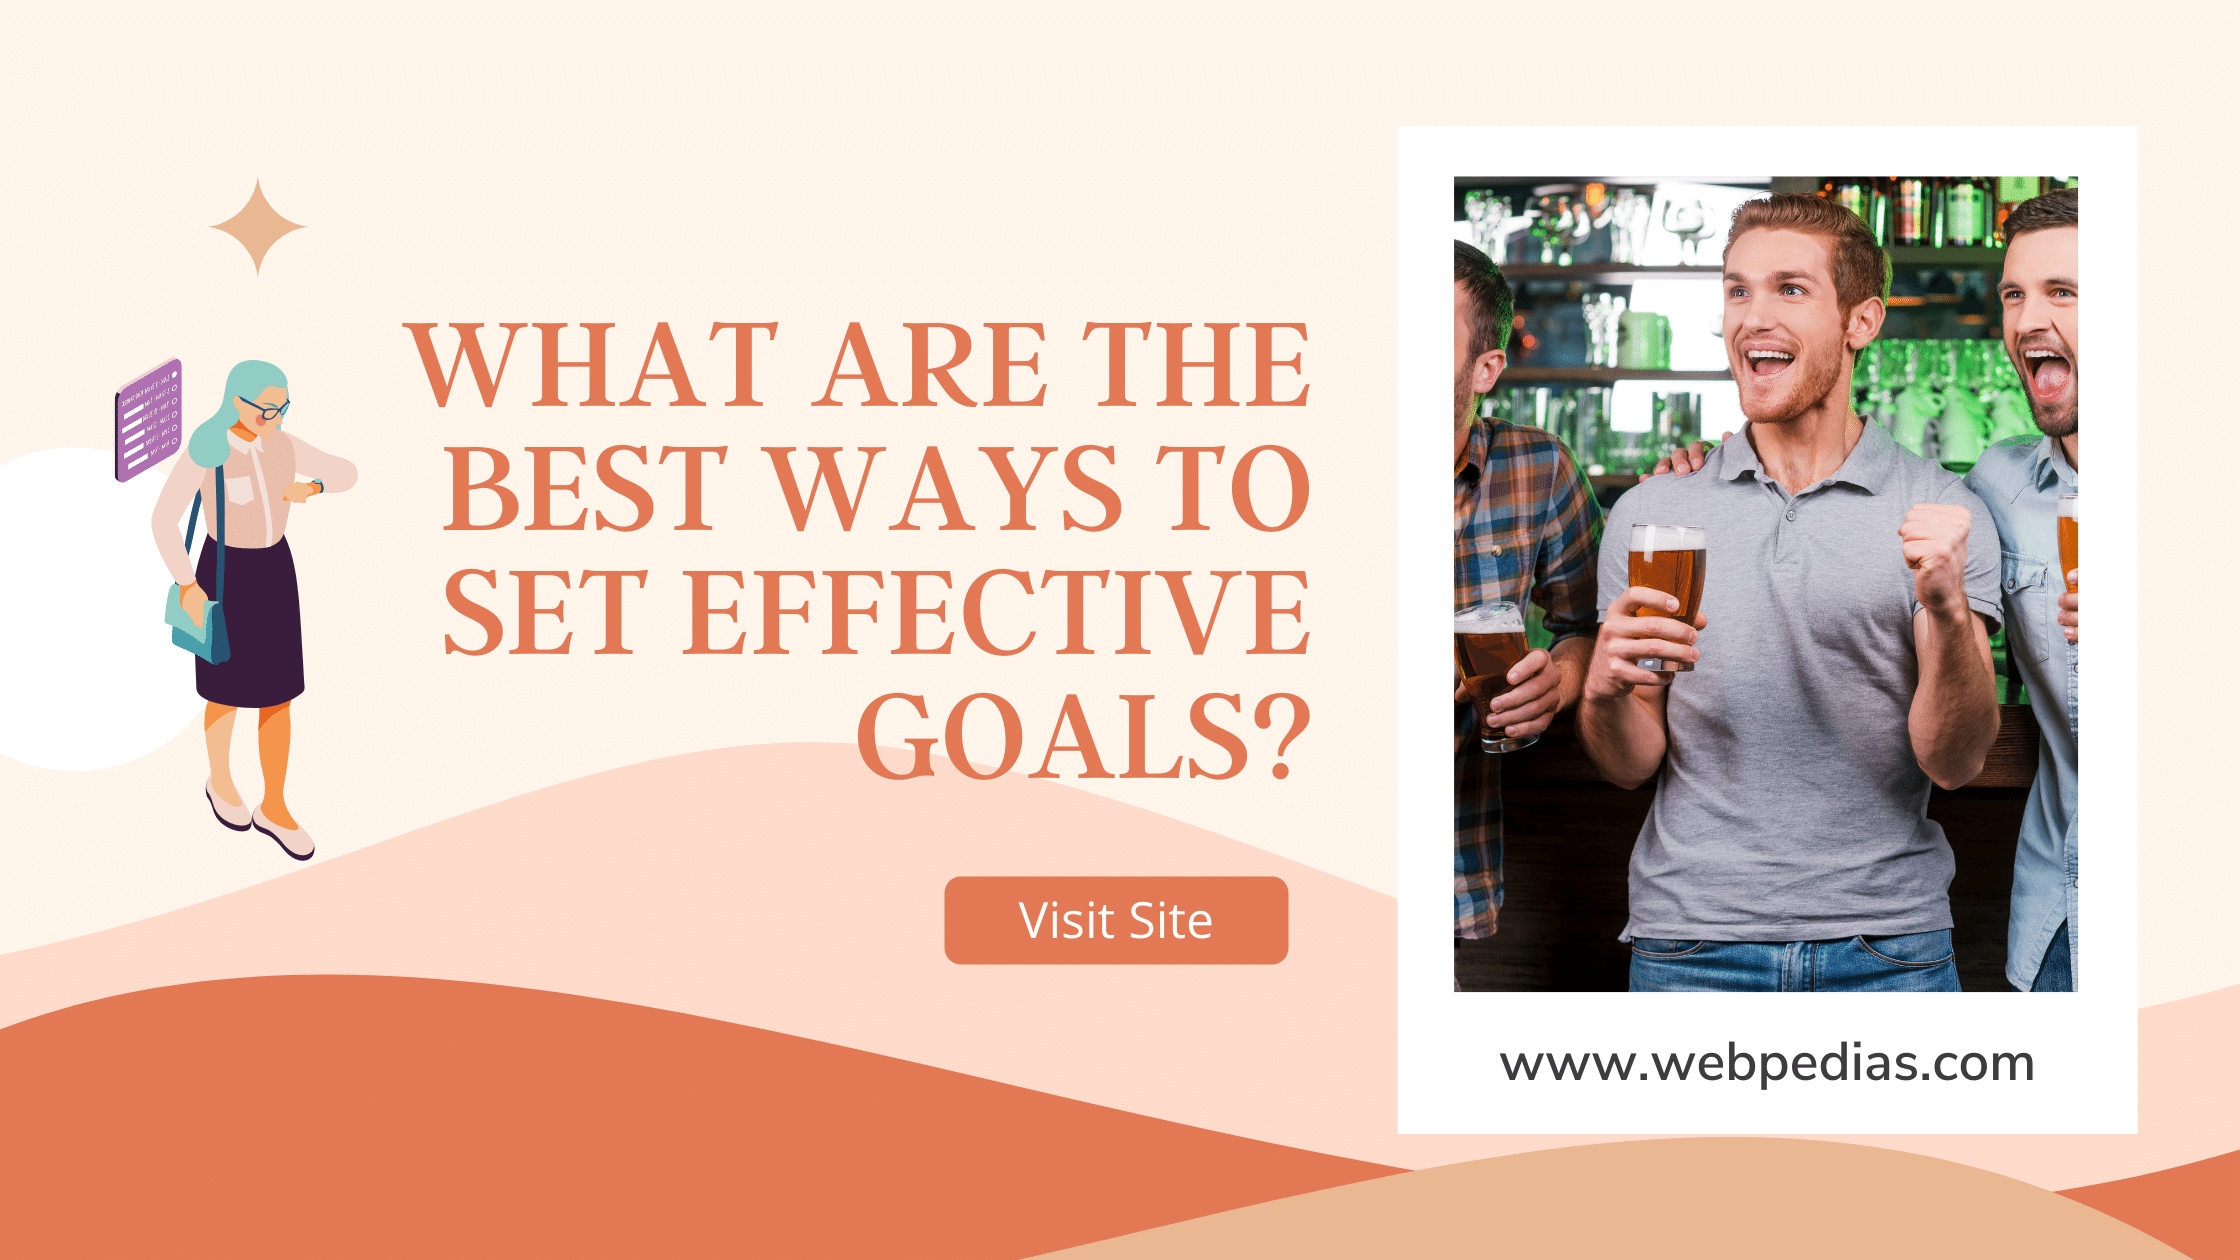 What Are the Best Ways to Set Effective Goals?